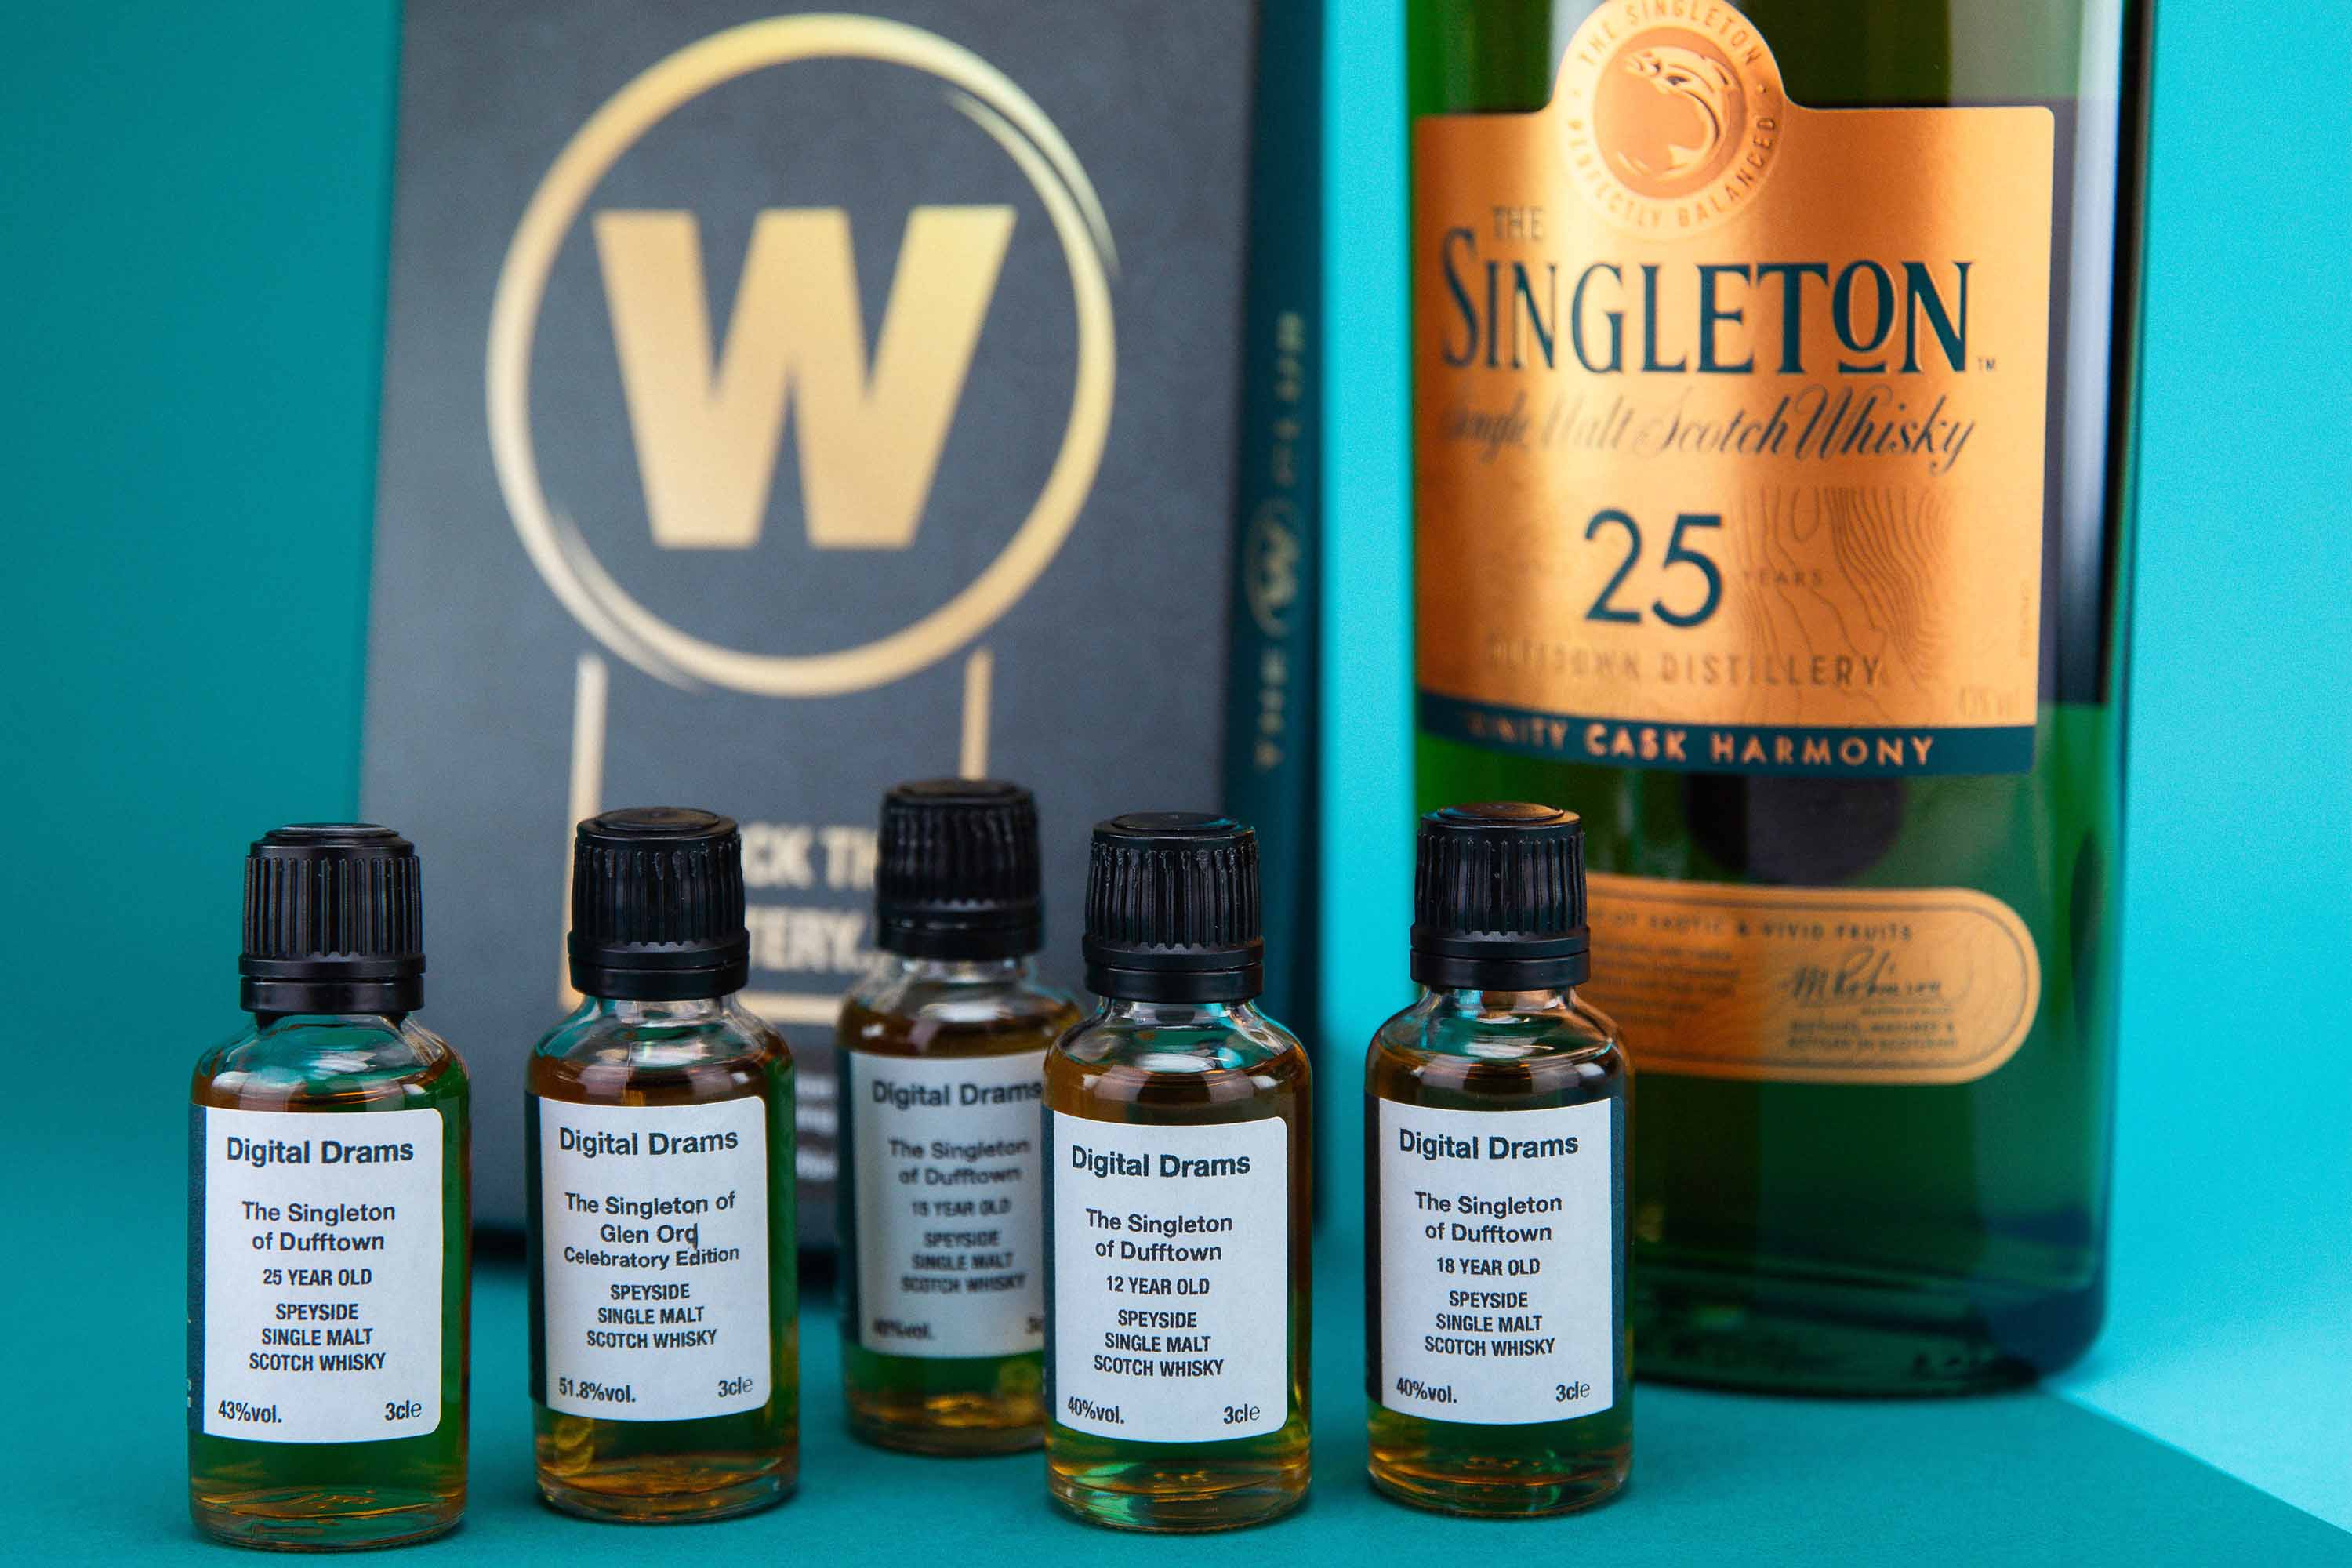 An image showing the five 3cl samples that come with the Digital Drams Singleton and Popcorn, along with a picture of the Singleton 25 Year Old 70cl